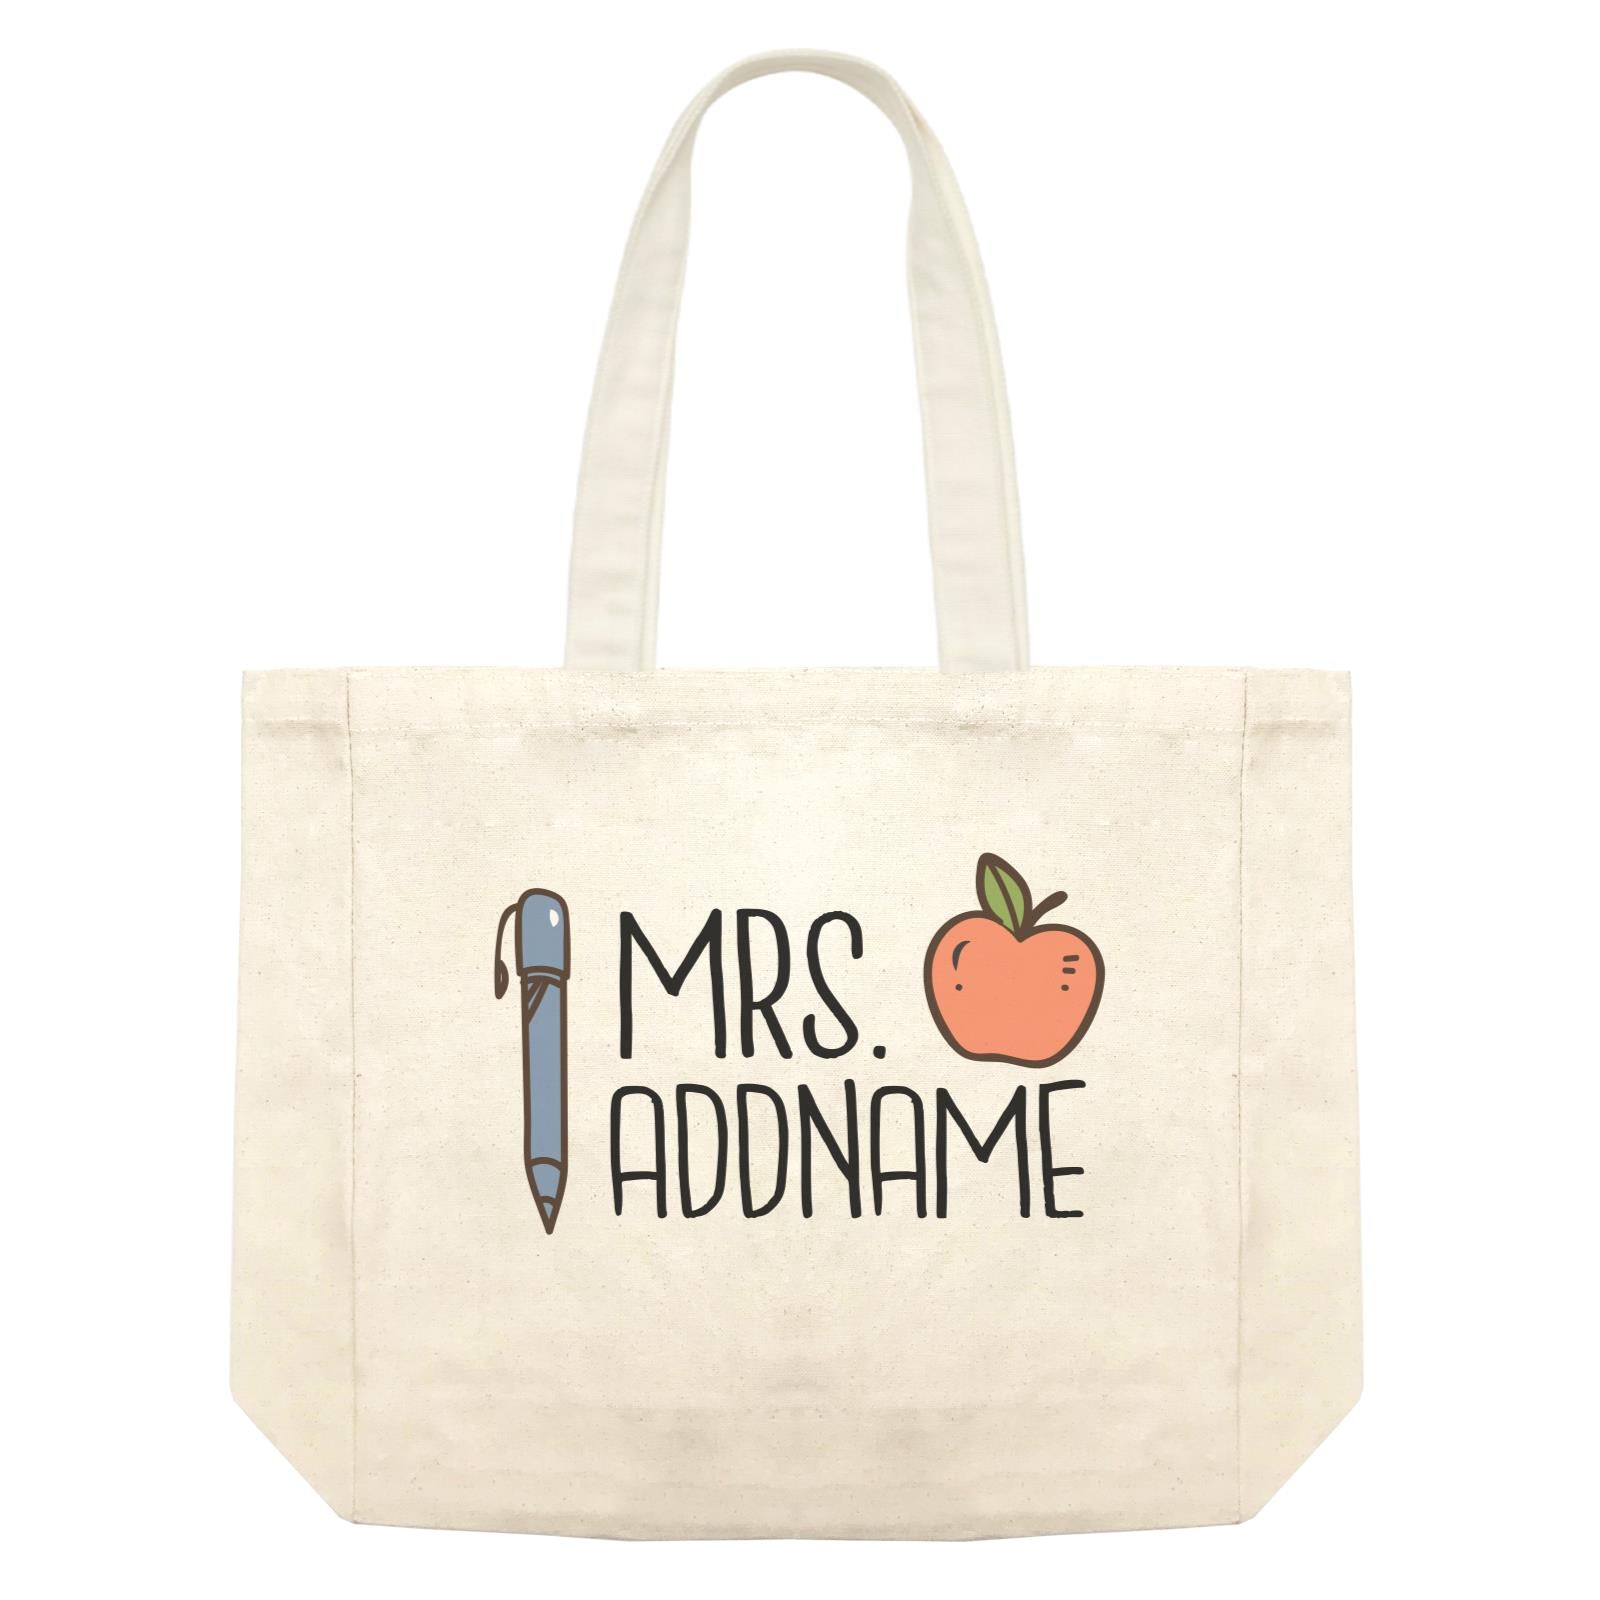 Teacher Addname Apple And Pen Mrs Addname Shopping Bag